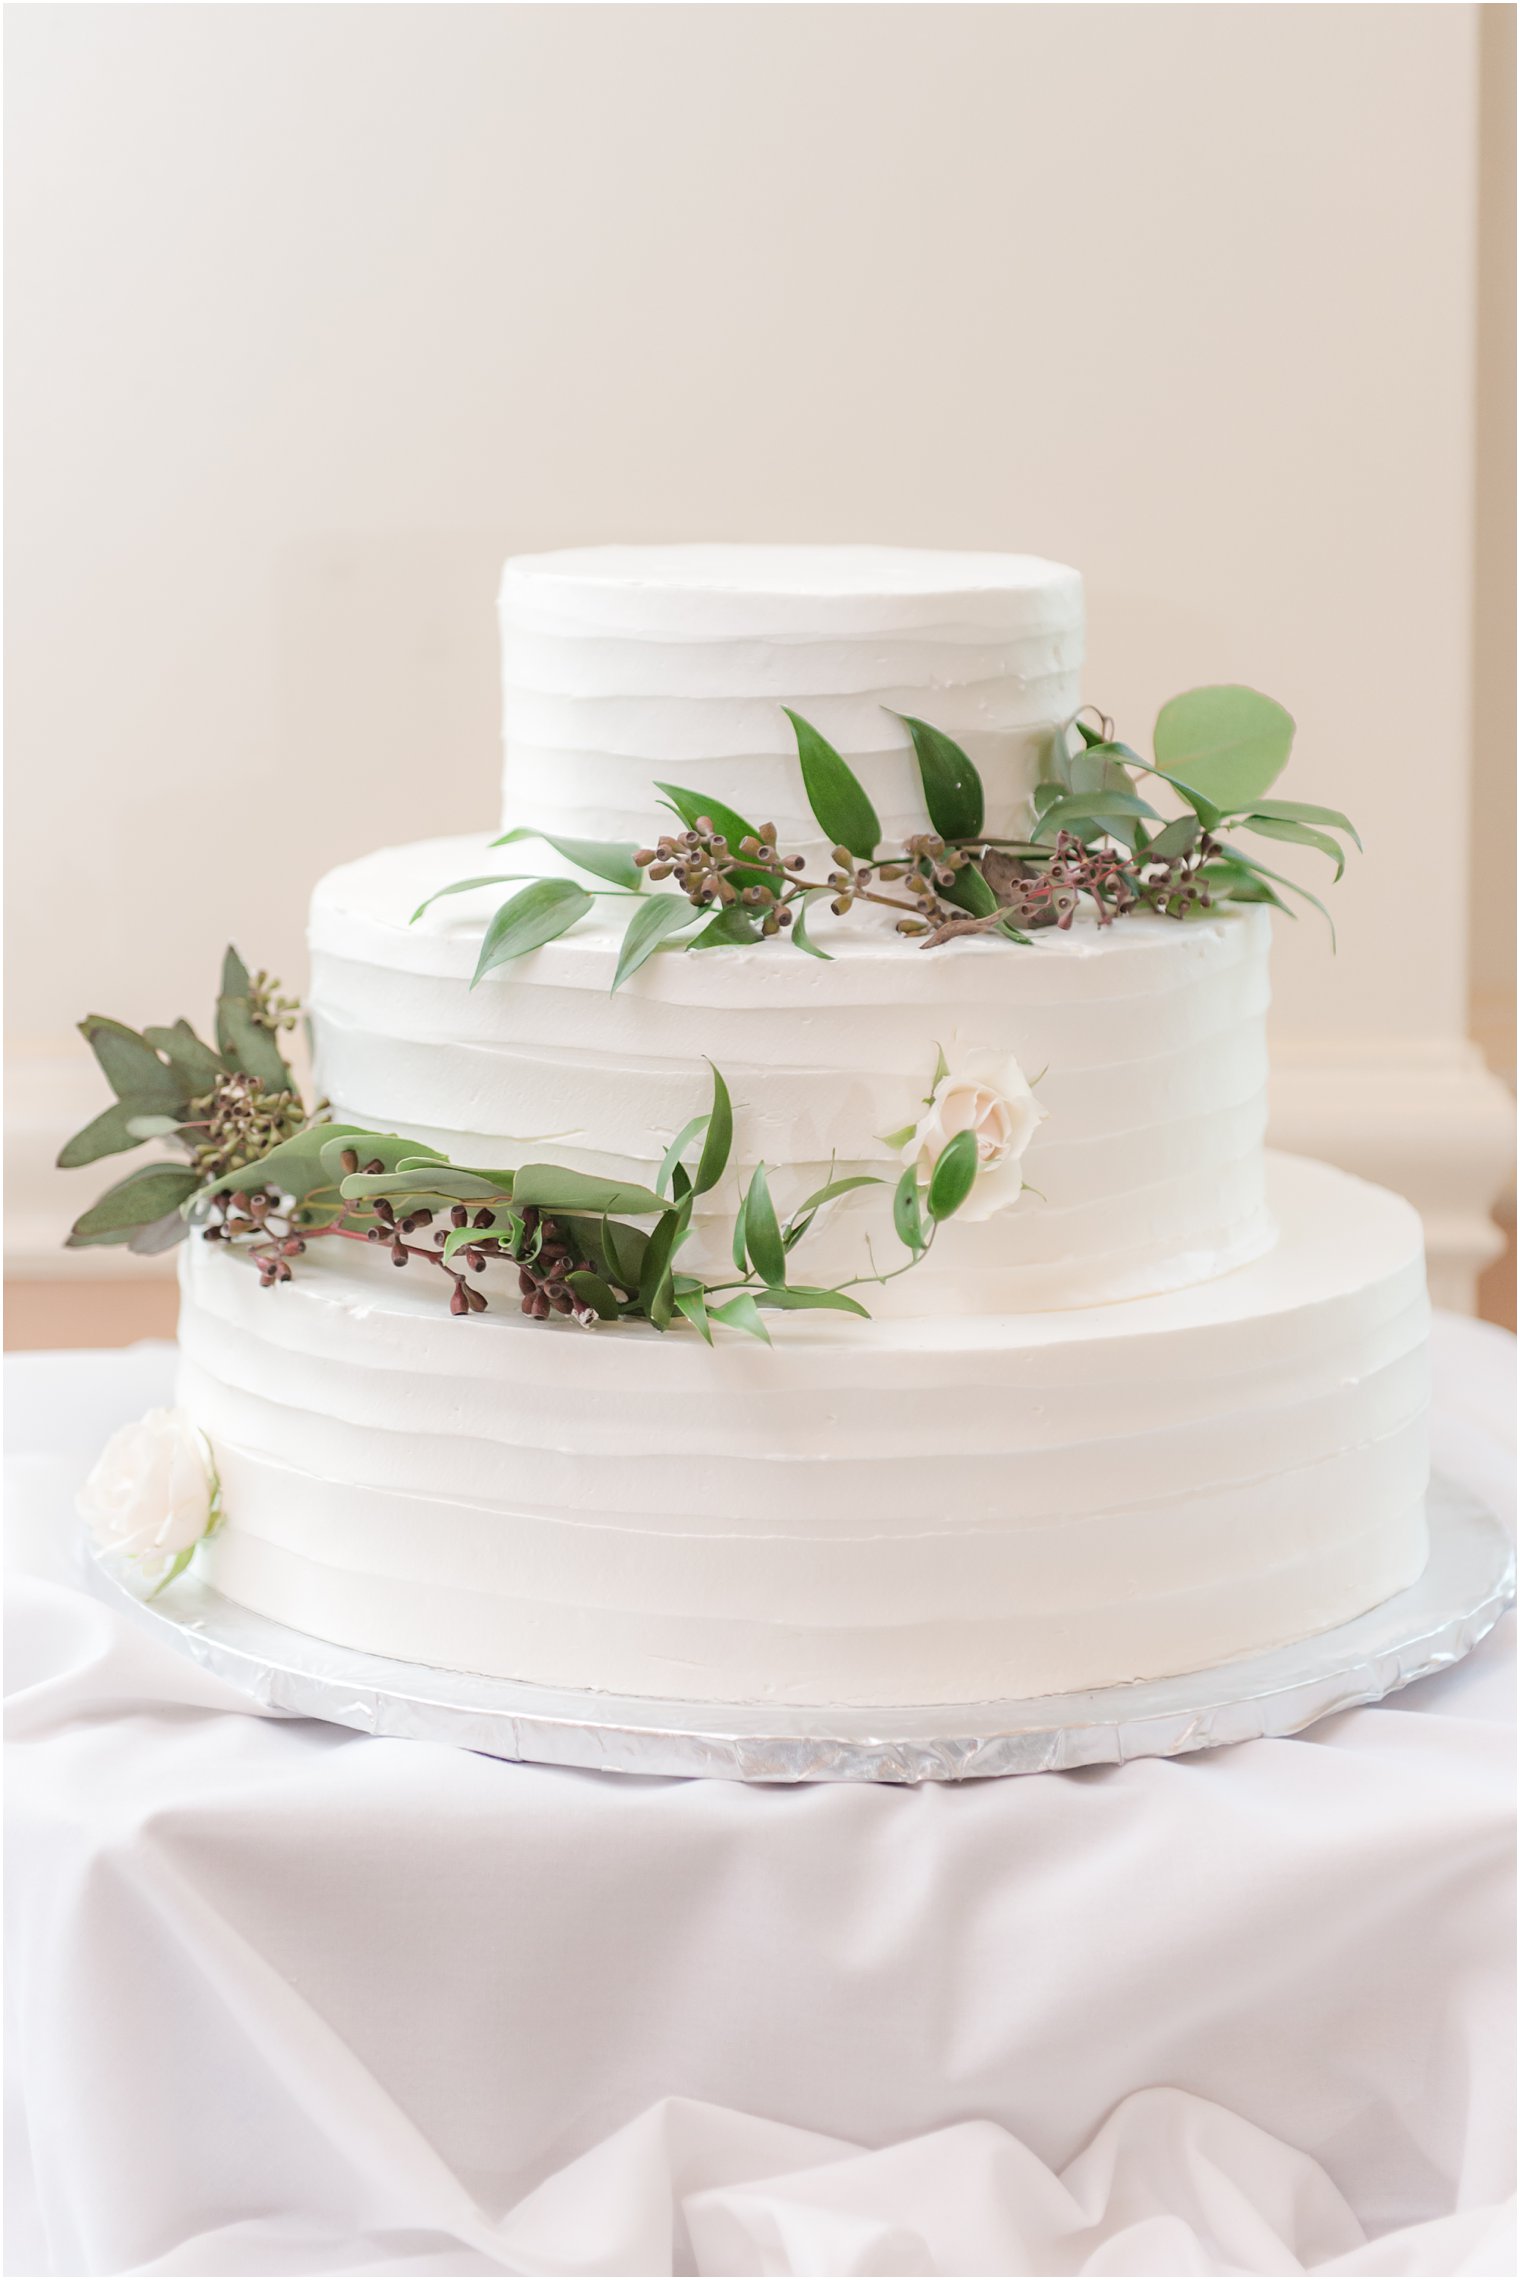 tiered wedding cake with greenery accents for NJ wedding day